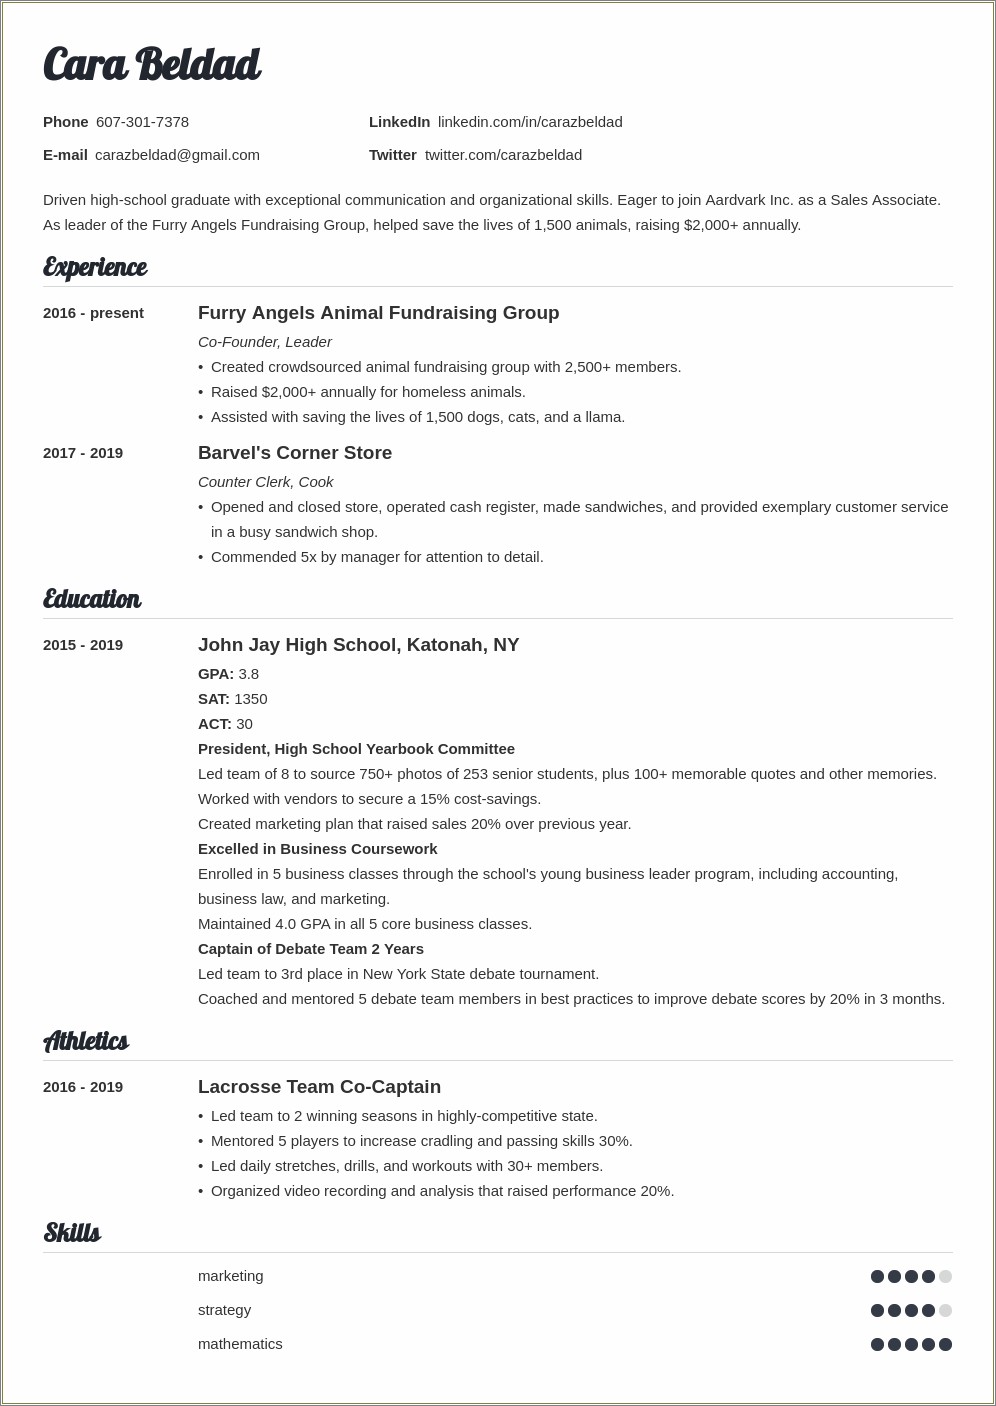 experience holder resume format